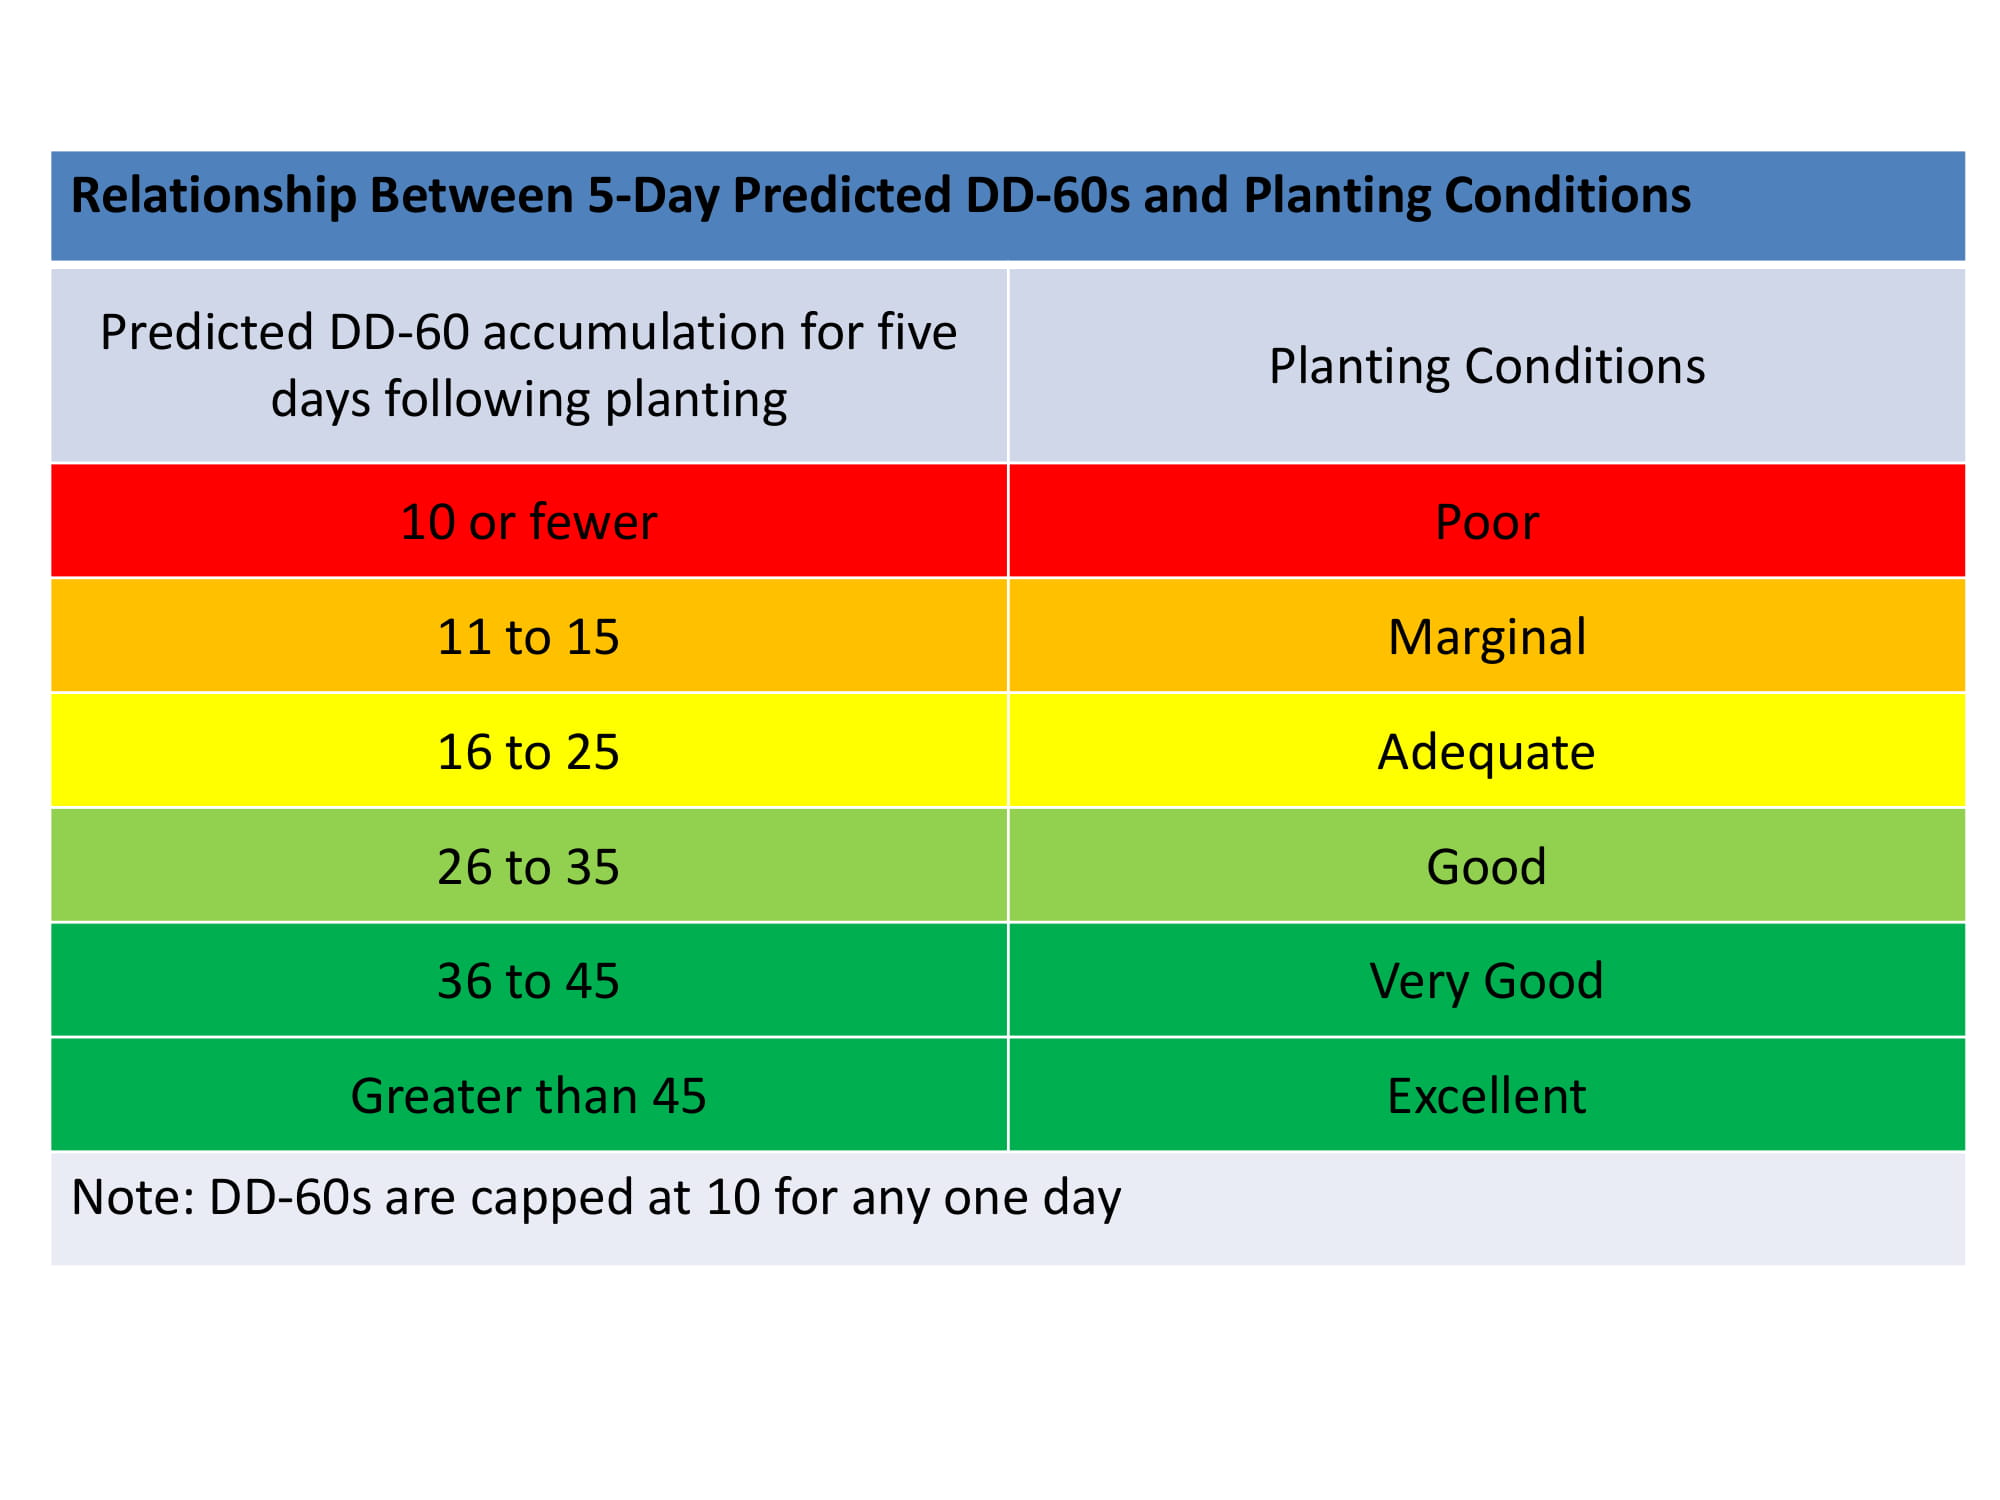 Table of typical growing conditions based on GDD-60 accumulations